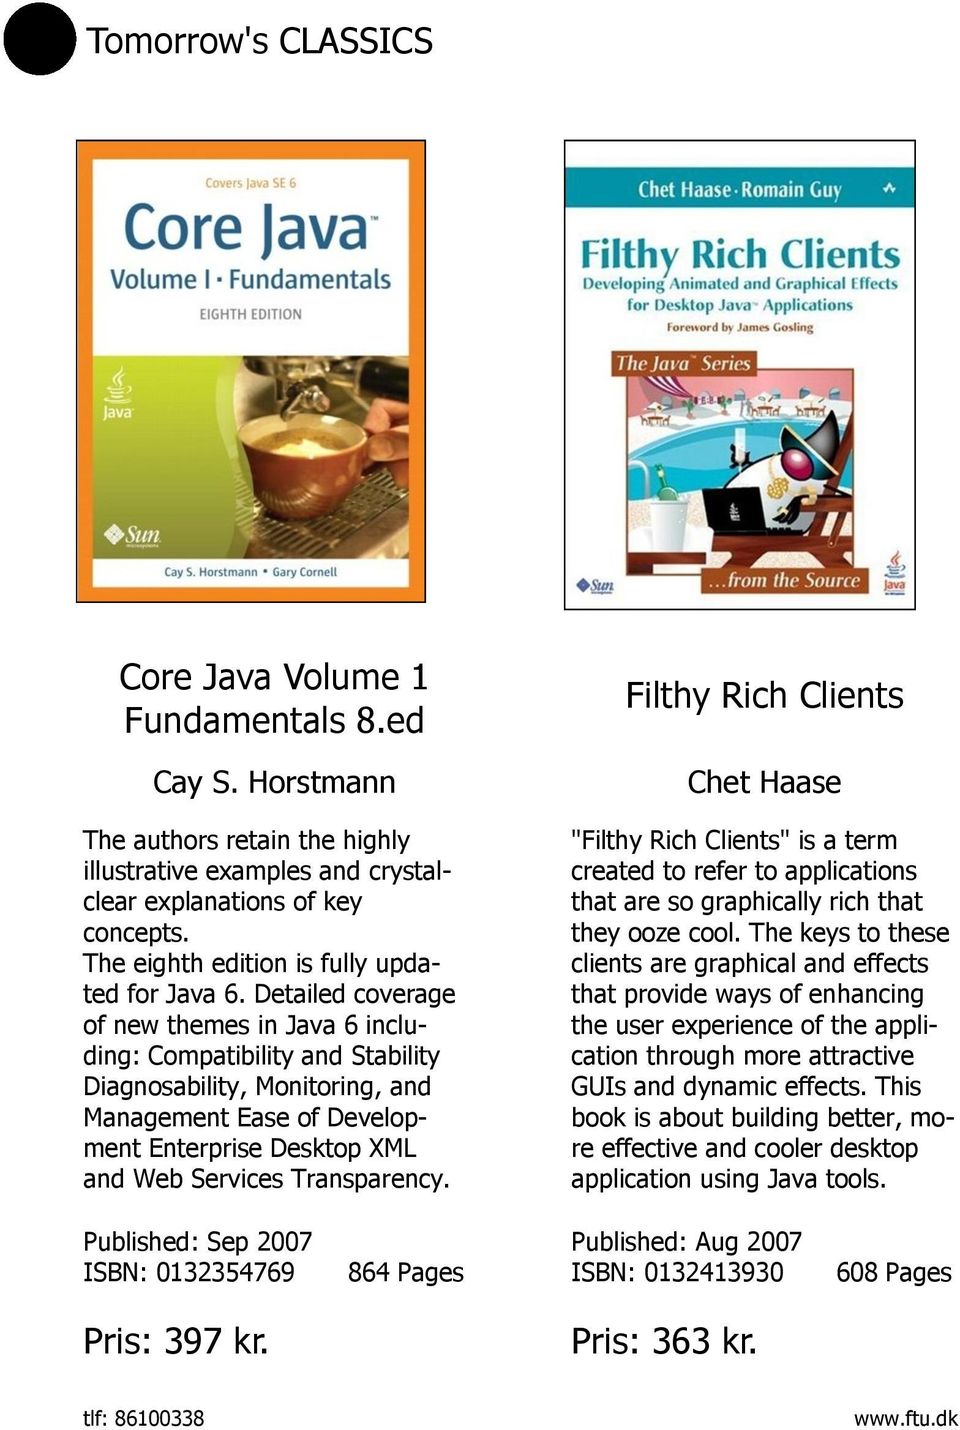 Filthy Rich Clients Chet Haase "Filthy Rich Clients" is a term created to refer to applications that are so graphically rich that they ooze cool.